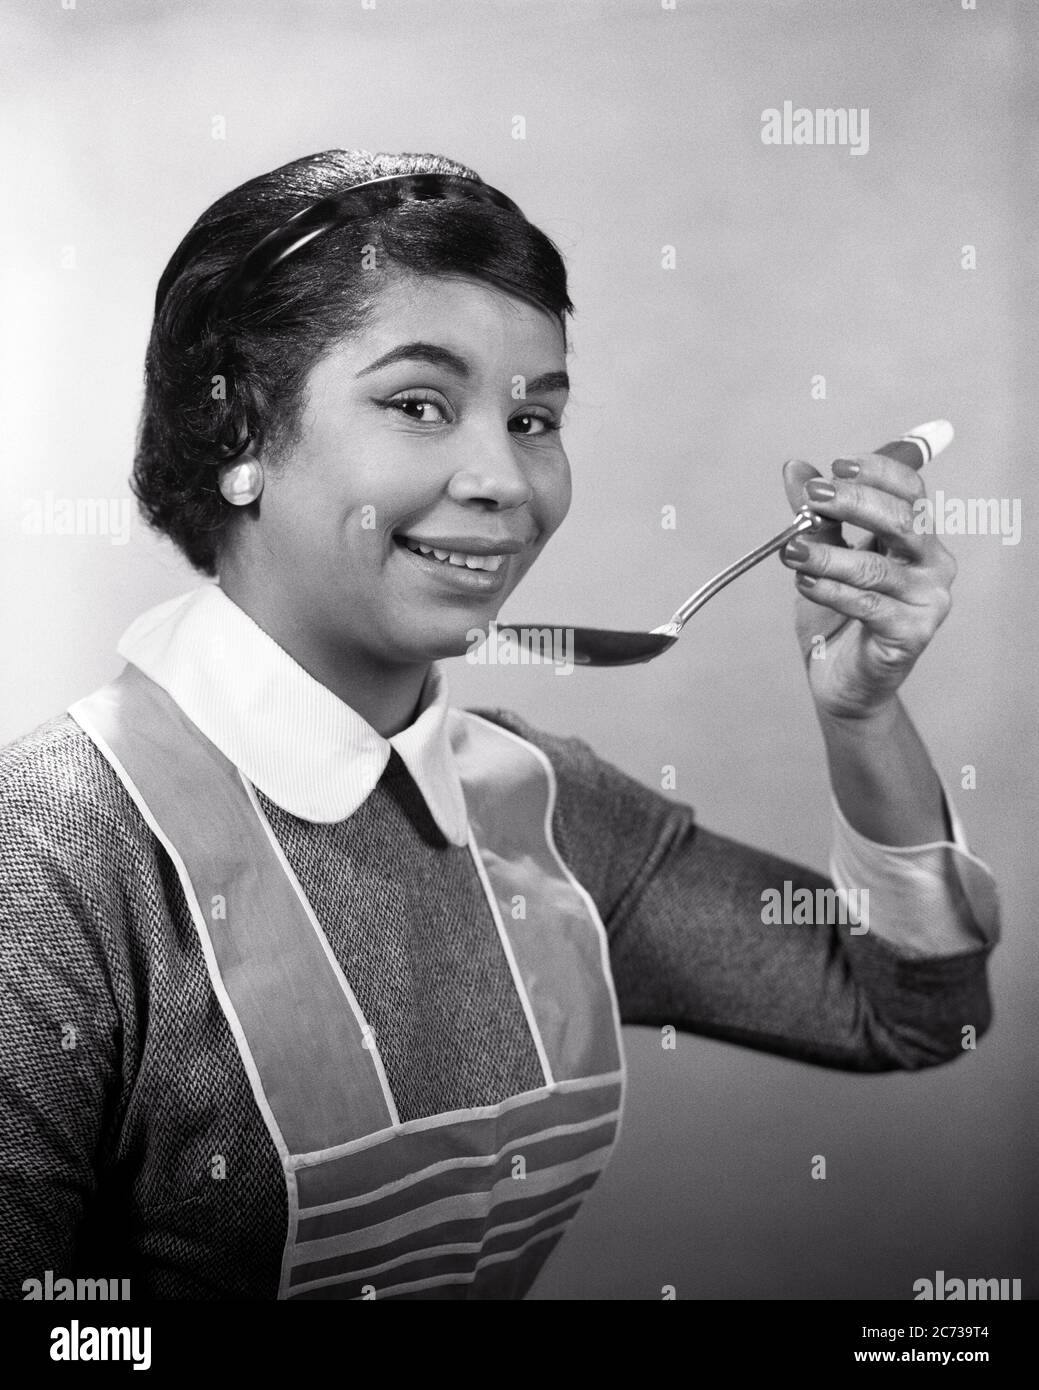 1950s 1960s AFRICAN AMERICAN WOMAN HOLDING SPOON TASTING WEARING APRON HOUSEWIFE COOKING LOOKING AT CAMERA - n153 HAR001 HARS B&W EYE CONTACT GOALS SUCCESS HOMEMAKER HAPPINESS HOMEMAKERS AFRICAN-AMERICANS AFRICAN-AMERICAN BLACK ETHNICITY PRIDE TASTE TASTING HOUSEWIVES SAMPLING STYLISH MID-ADULT MID-ADULT WOMAN SAMPLE BLACK AND WHITE FOOD PREPARATION HAR001 OLD FASHIONED AFRICAN AMERICANS Stock Photo